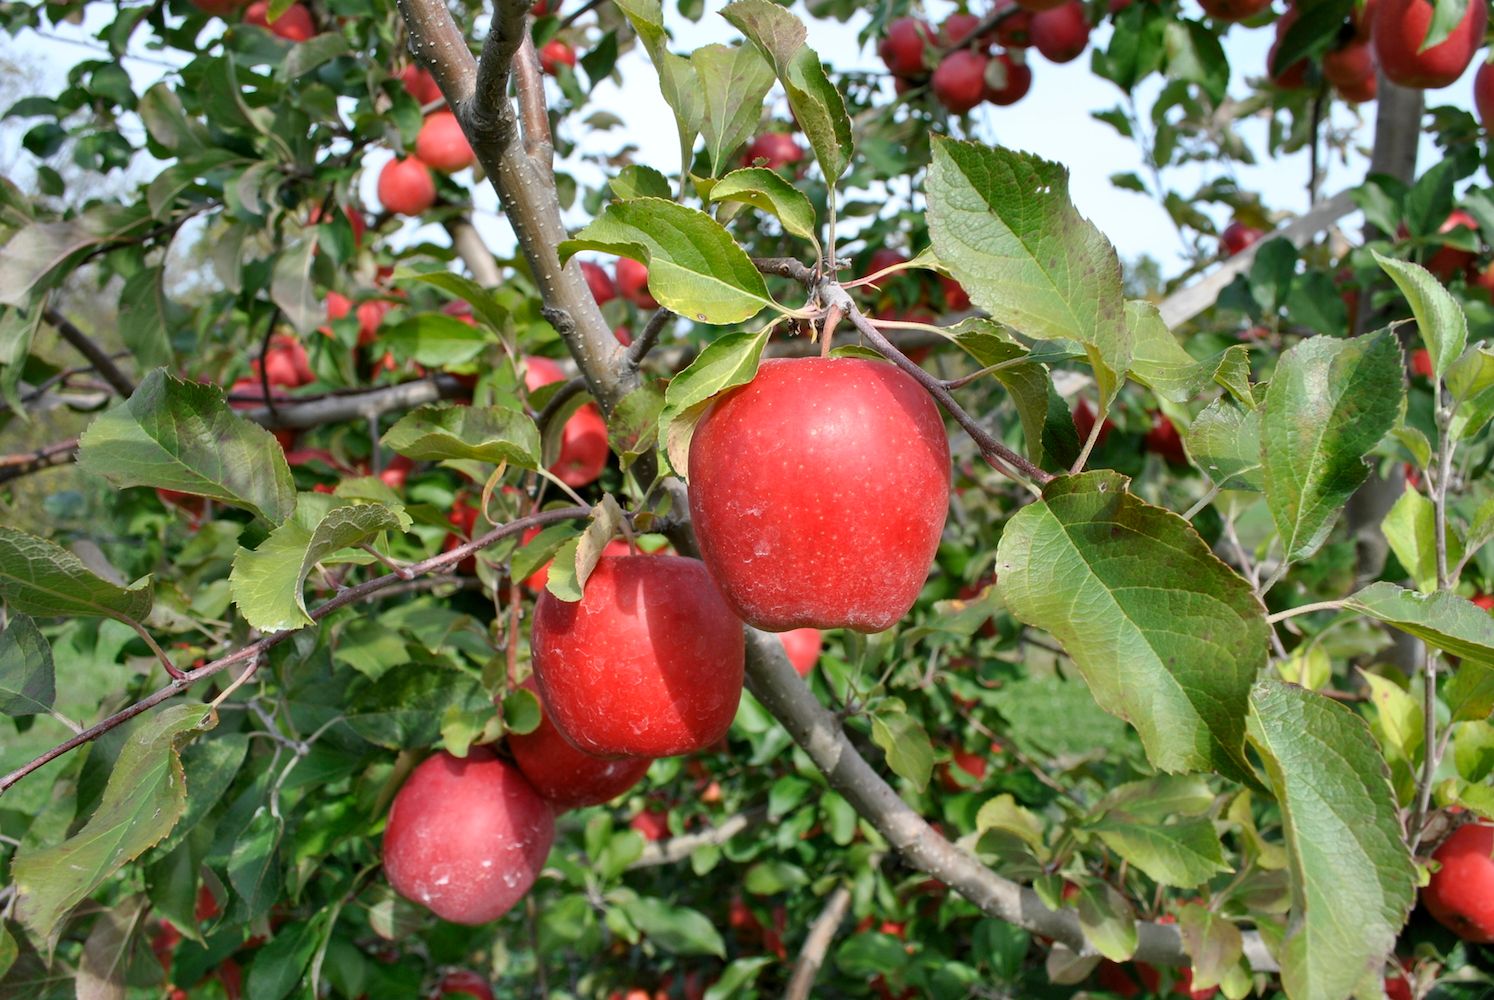 A Guide to Apples and How to Enjoy Them